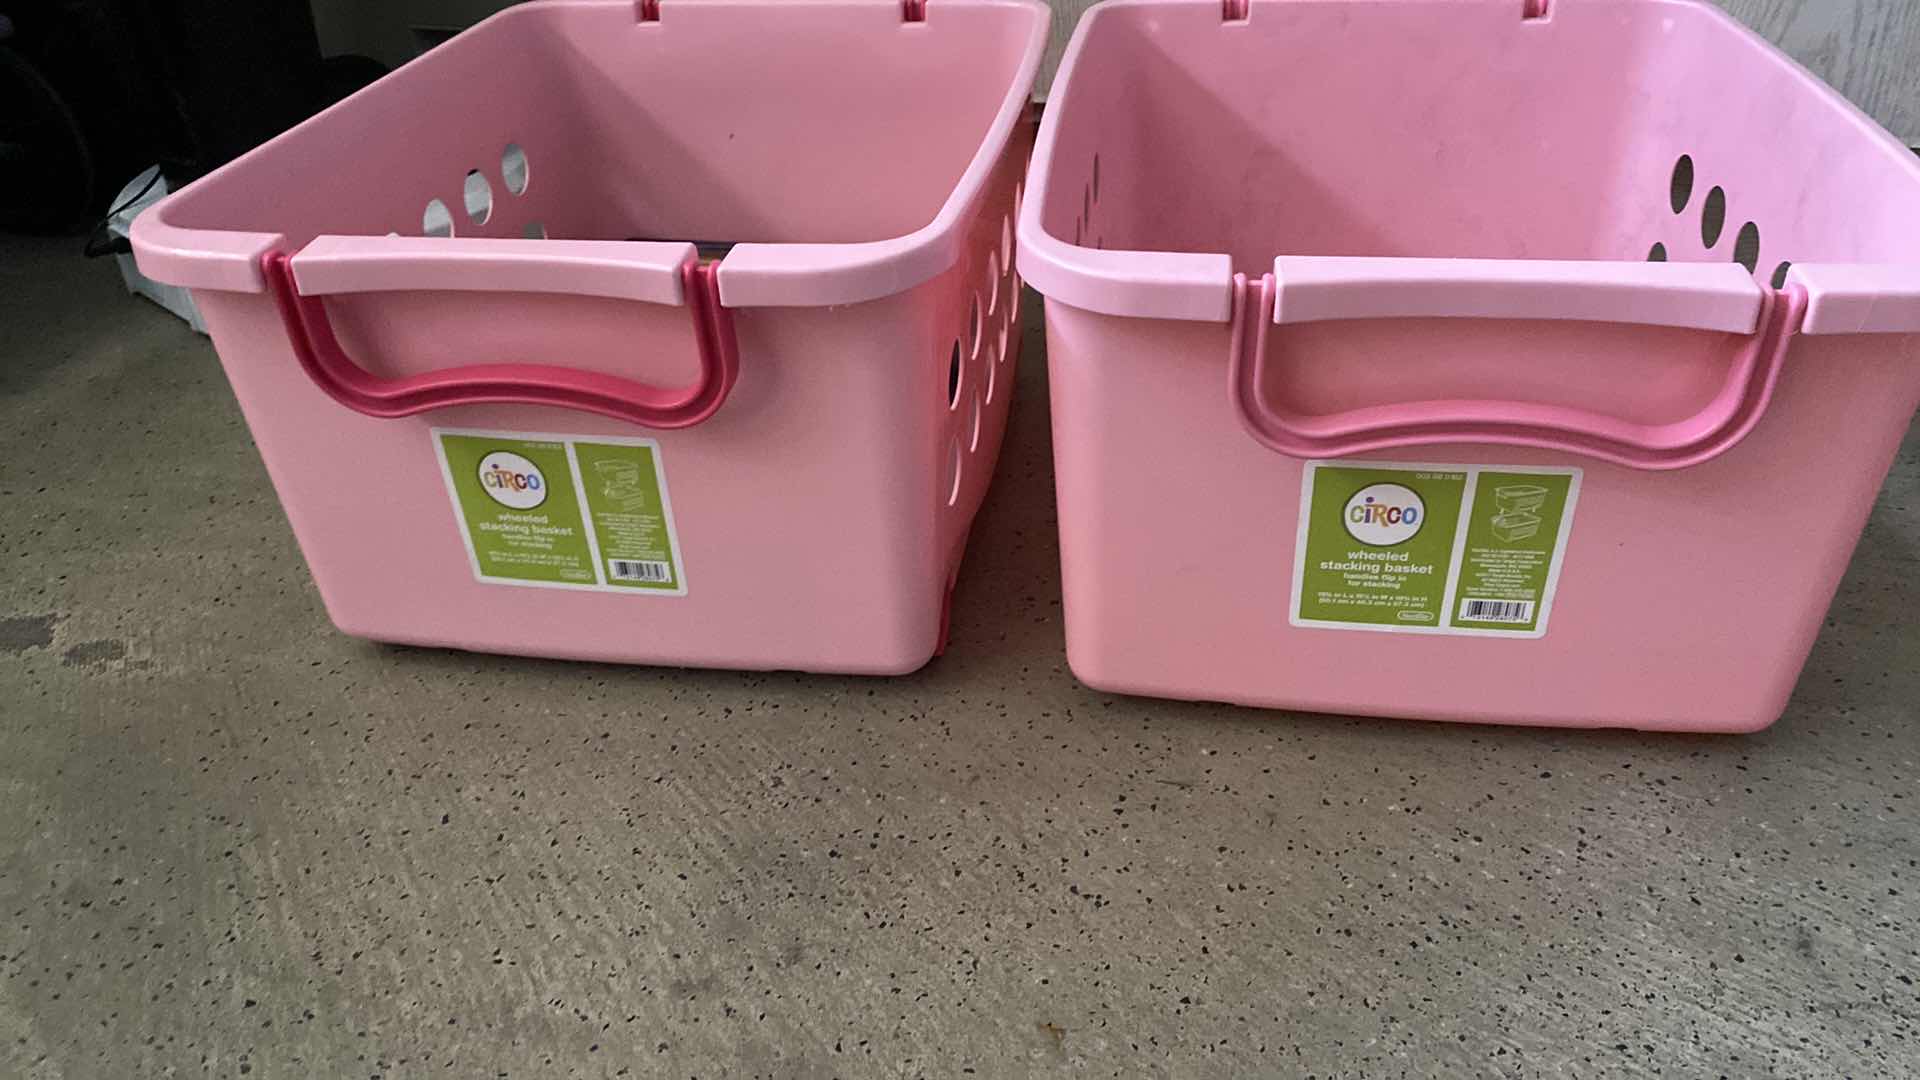 Photo 3 of PAIR OF PLASTIC PINK TOTES WITH WHEELS 20” x 16” H 10 1/2” AND ANGRY BIRDS GAME - UNKNOWN IF PIECES MISSING